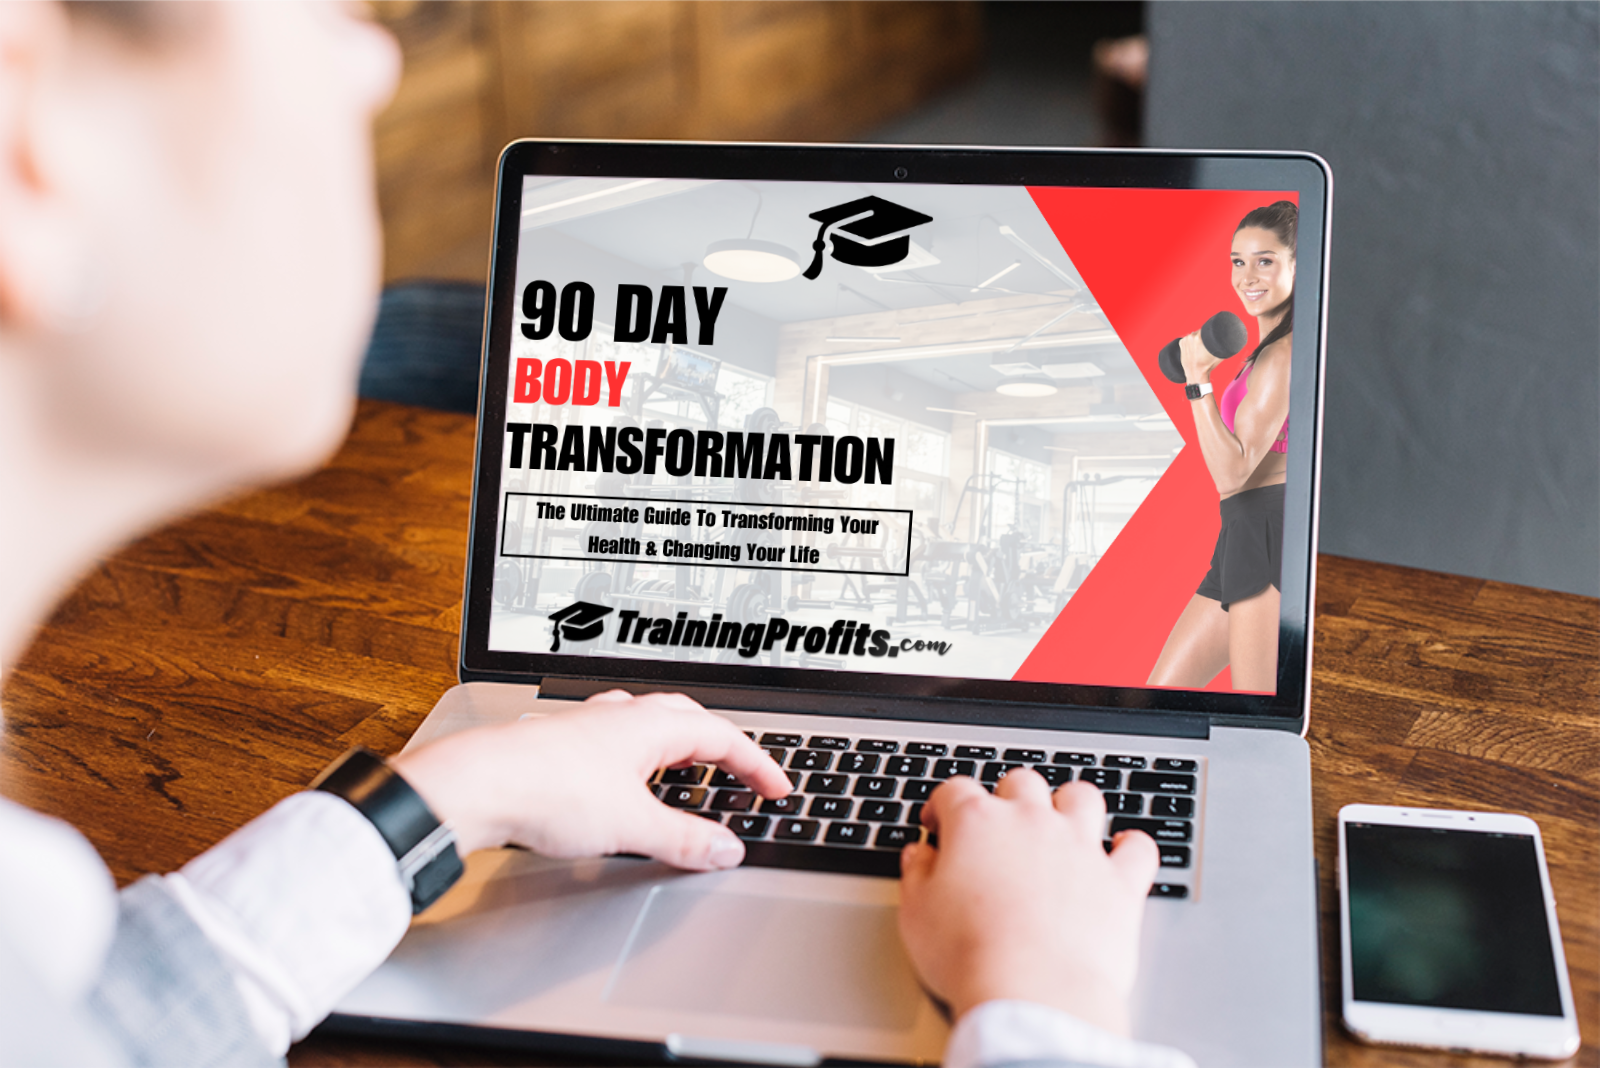 90 Day Body Transformation course